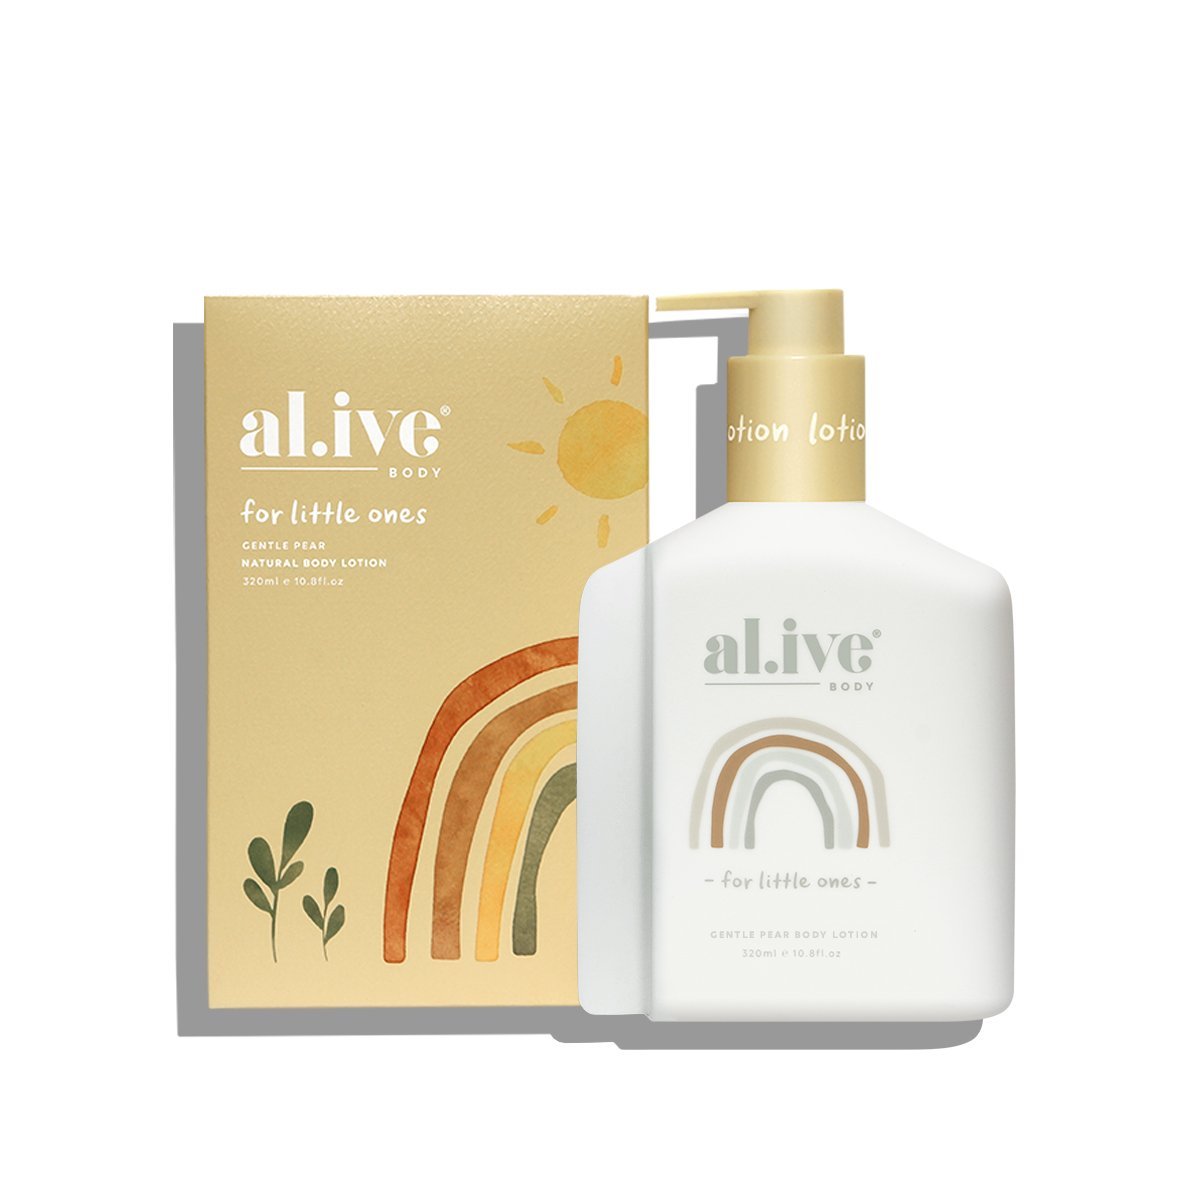 The al.ive body Baby Body Lotion